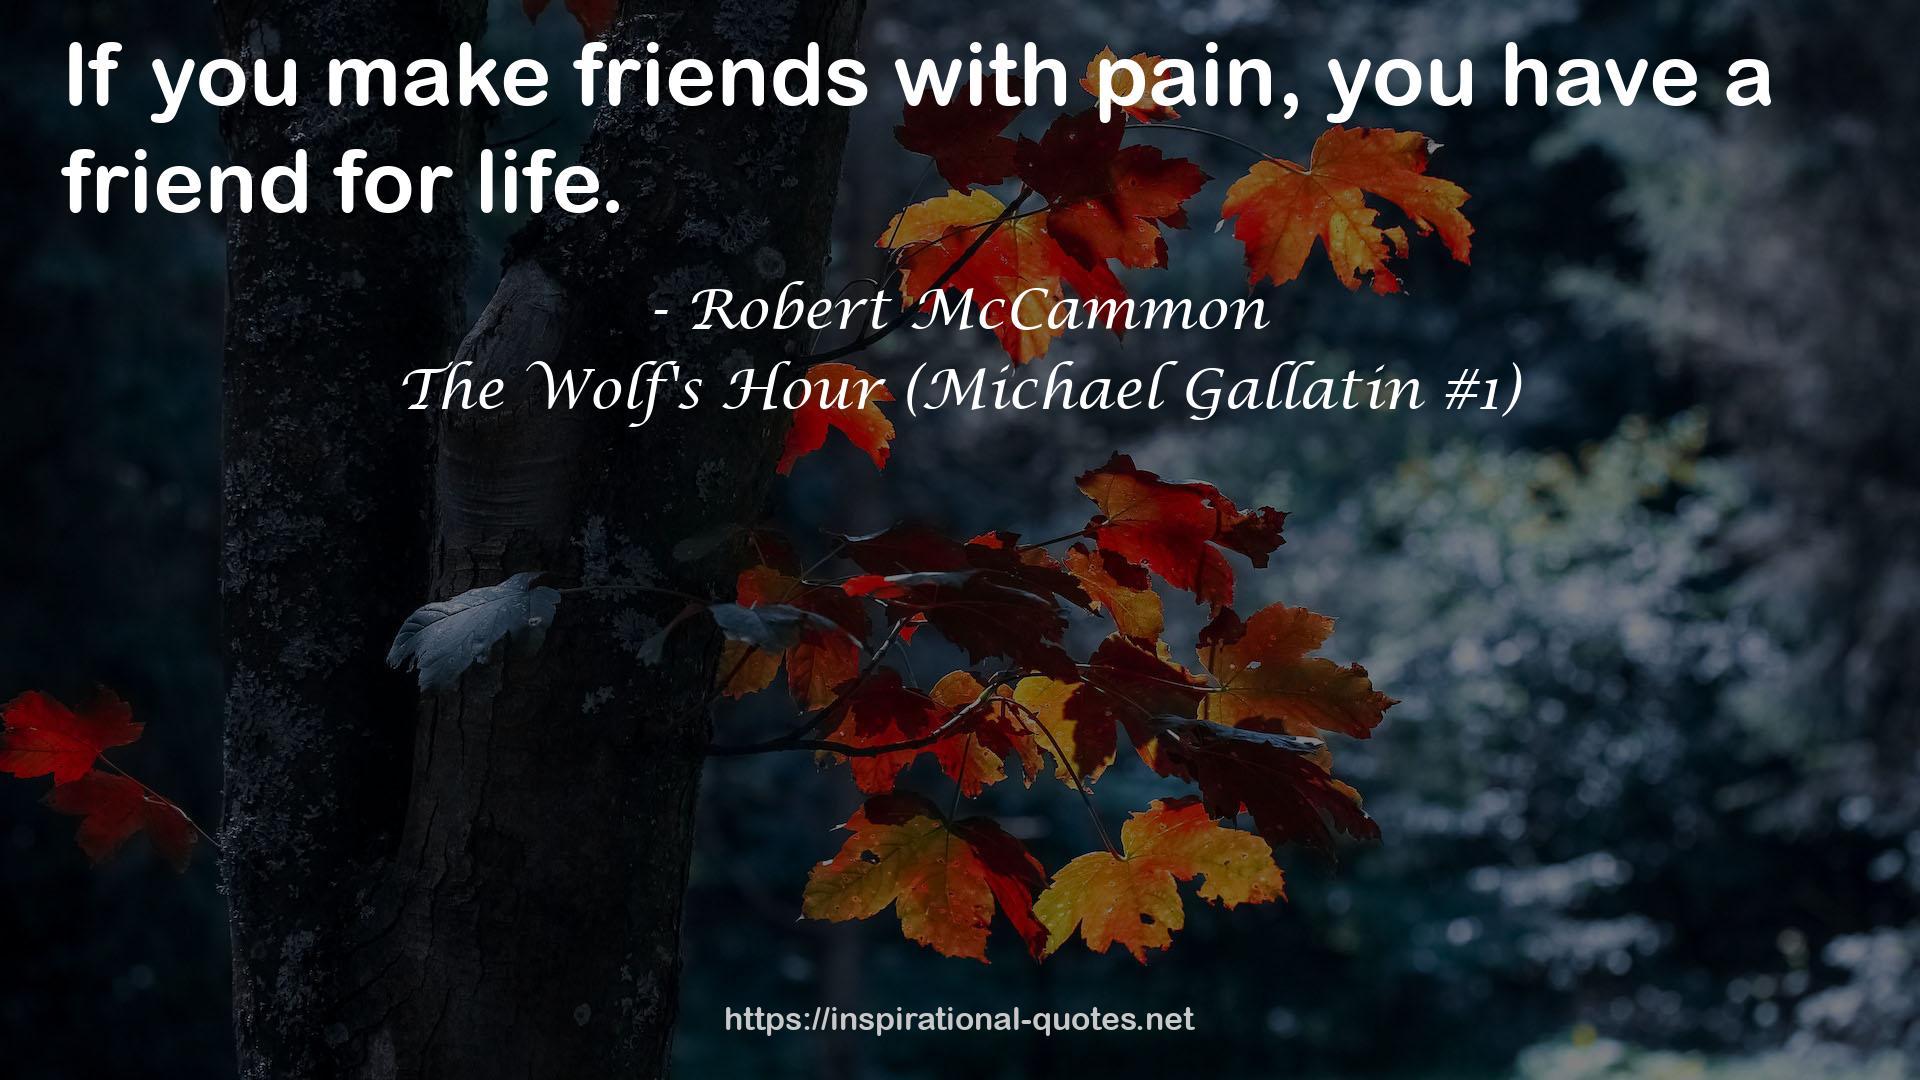 The Wolf's Hour (Michael Gallatin #1) QUOTES